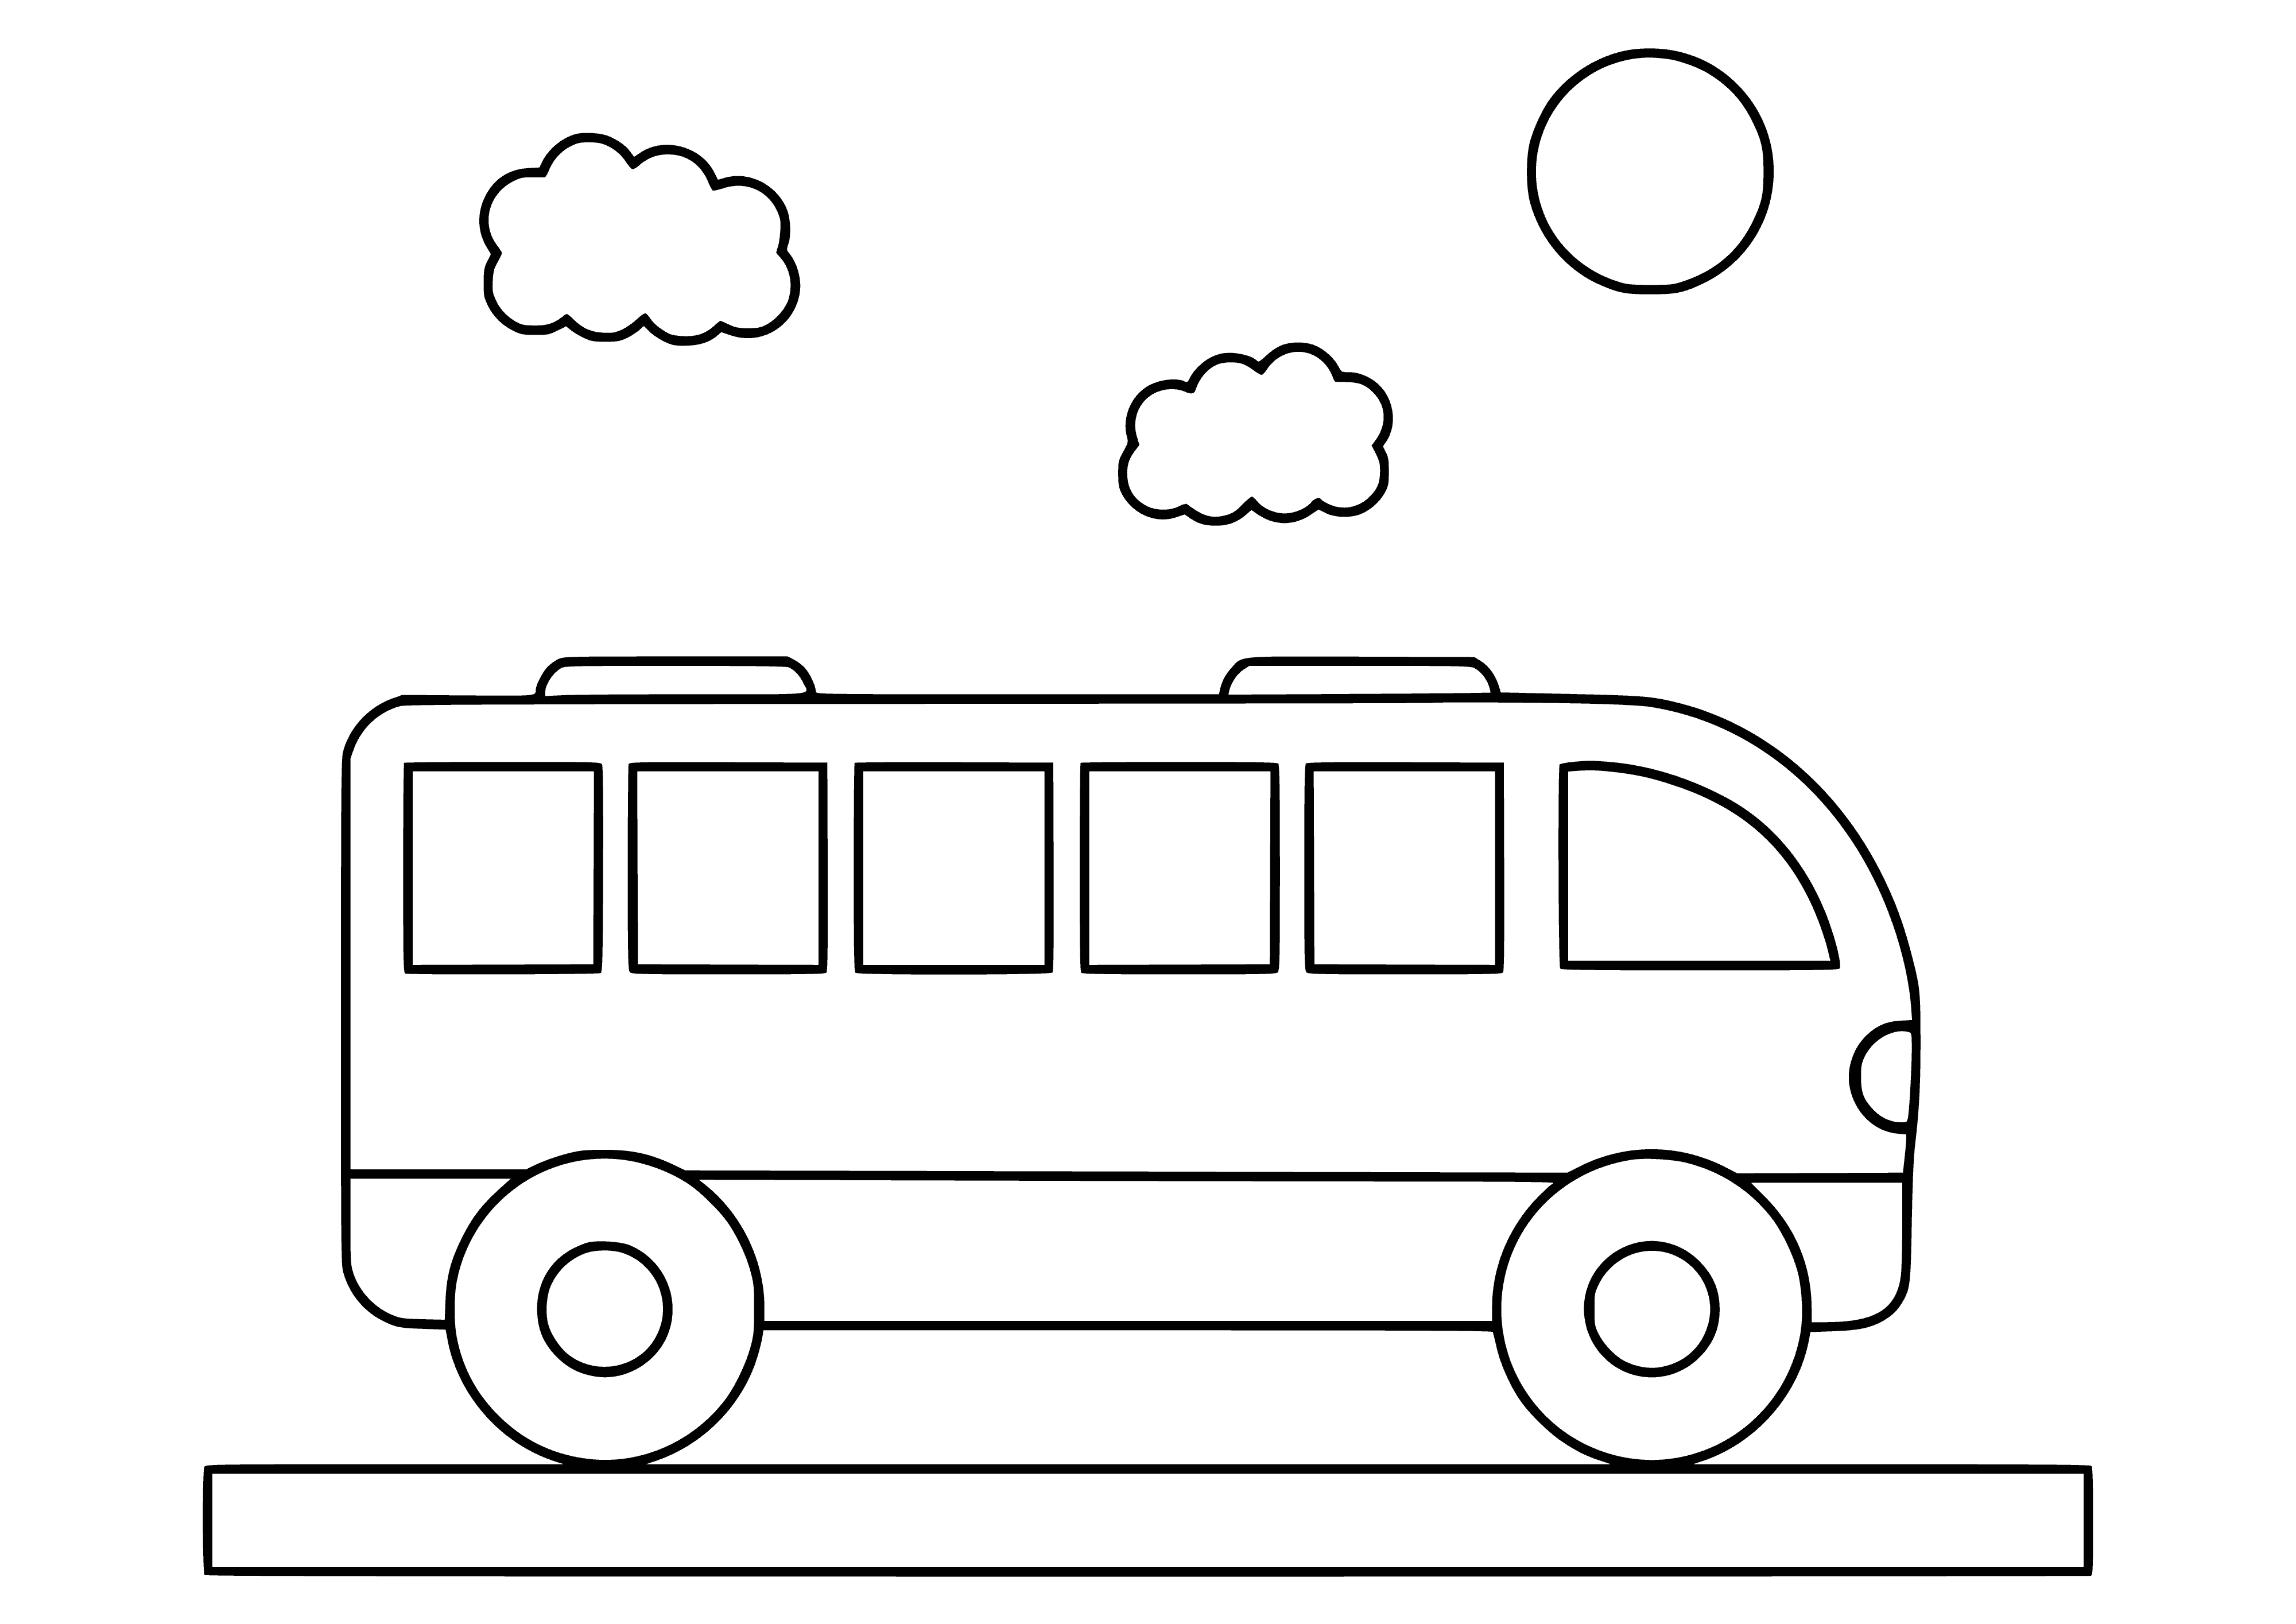 coloring page: A big, yellow bus with lots of windows.